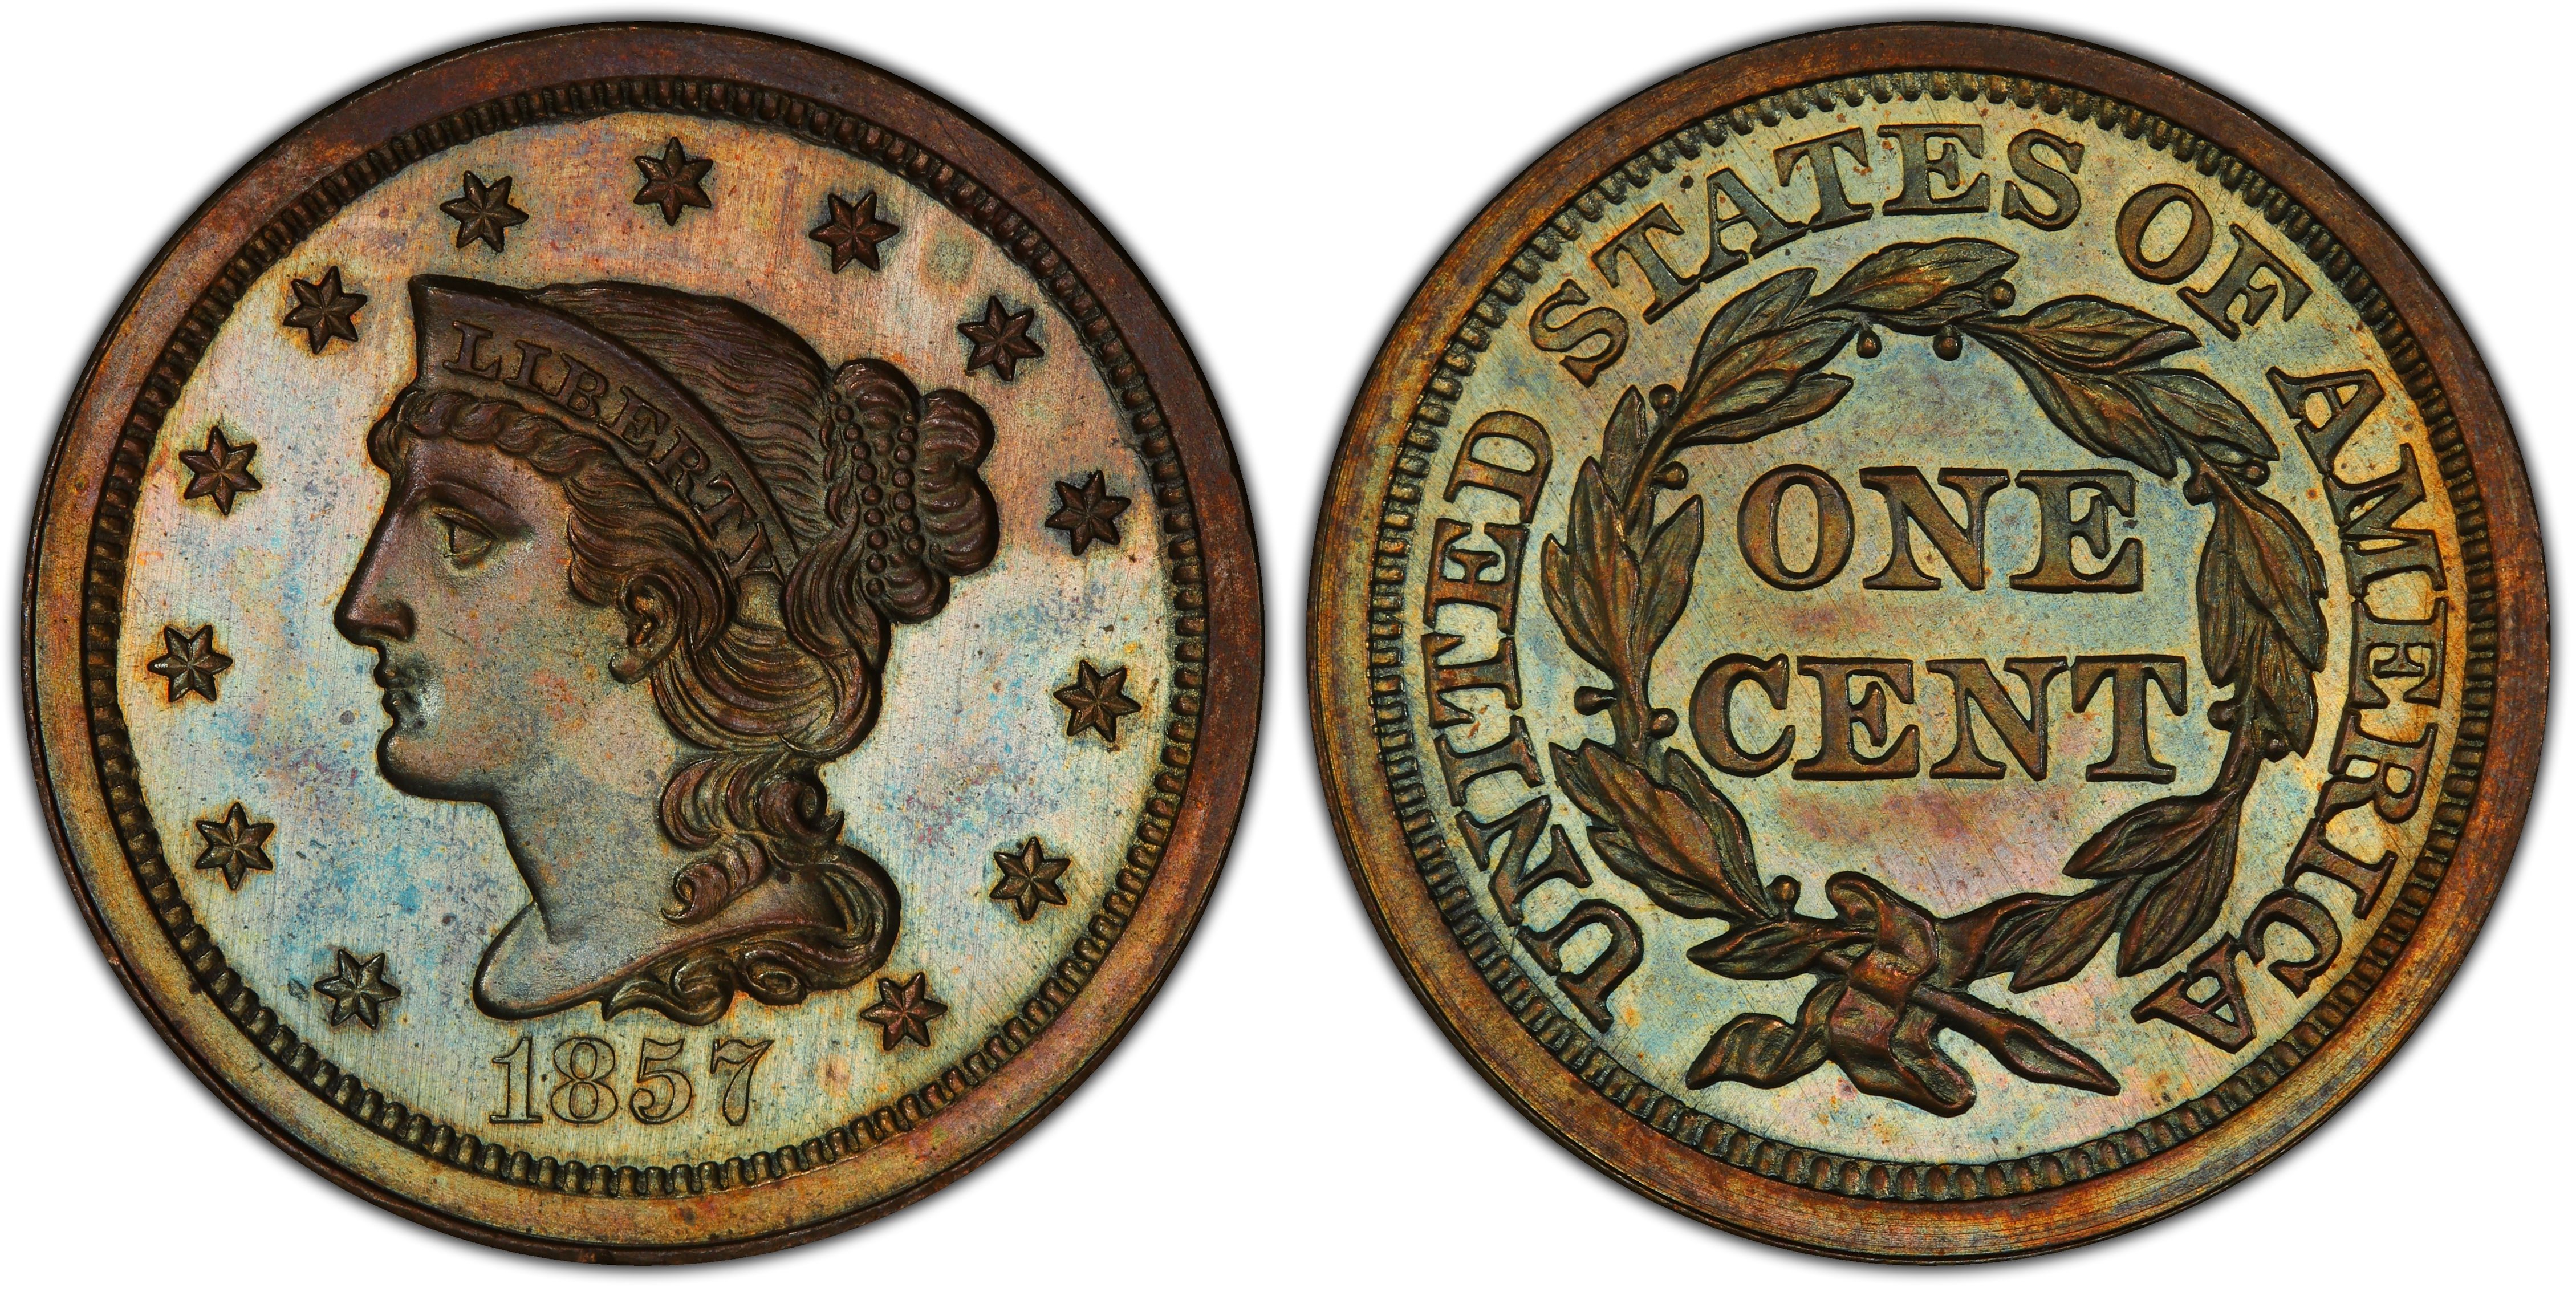 1854 1/2C, RD (Proof) Braided Hair Half Cent - PCGS CoinFacts